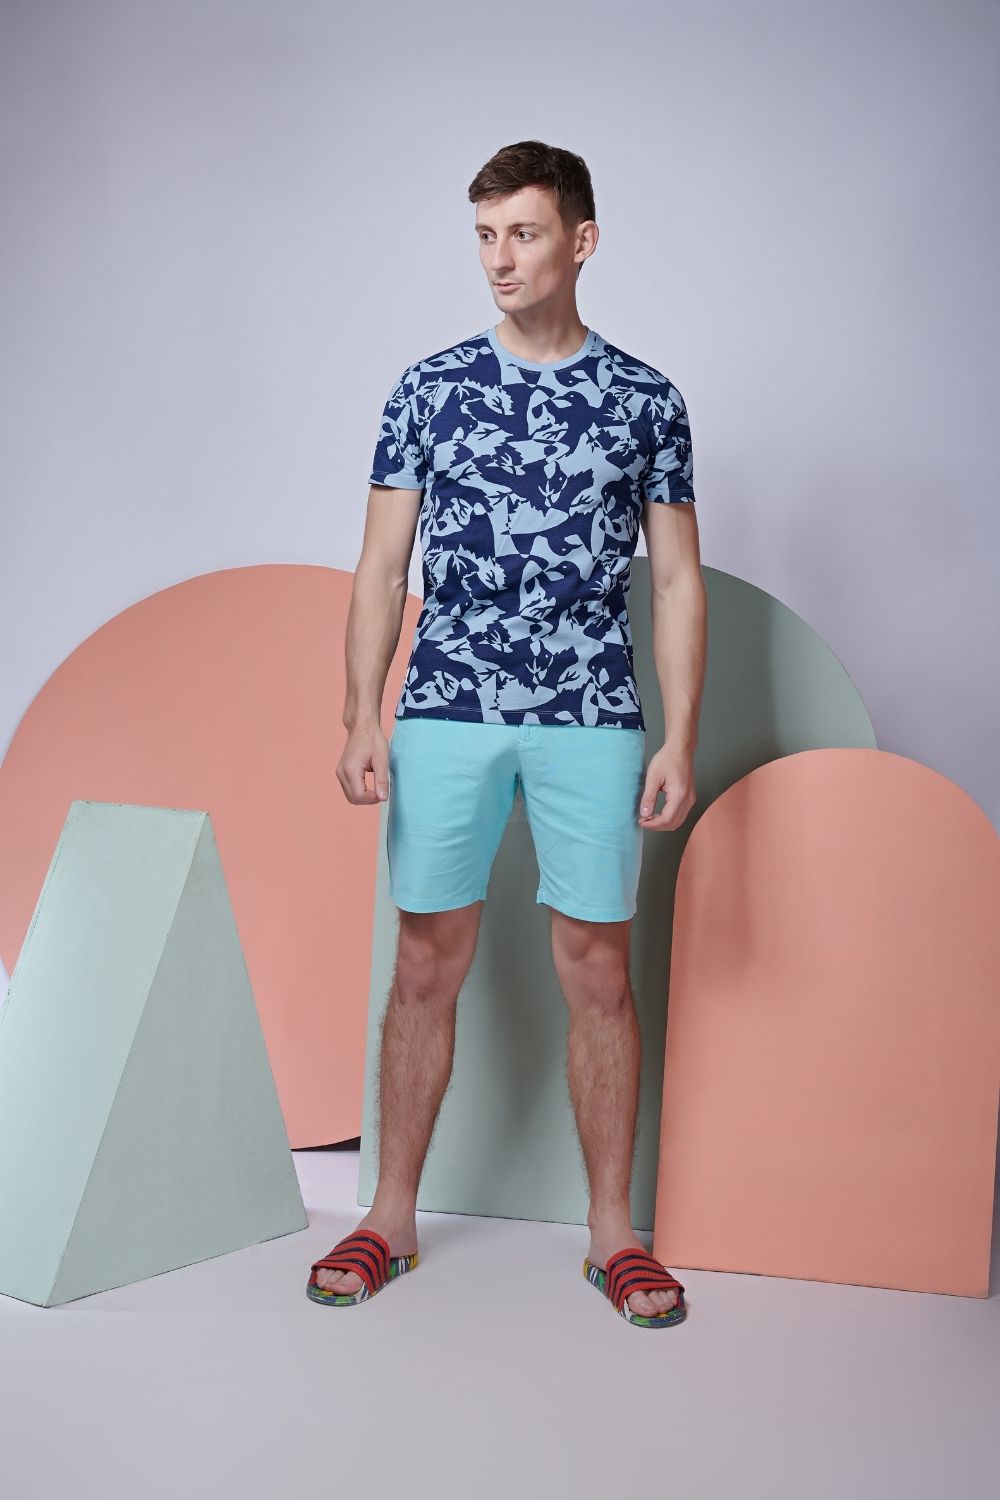 Bird patterned, all over print T shirt for men with half sleeves and round neck.